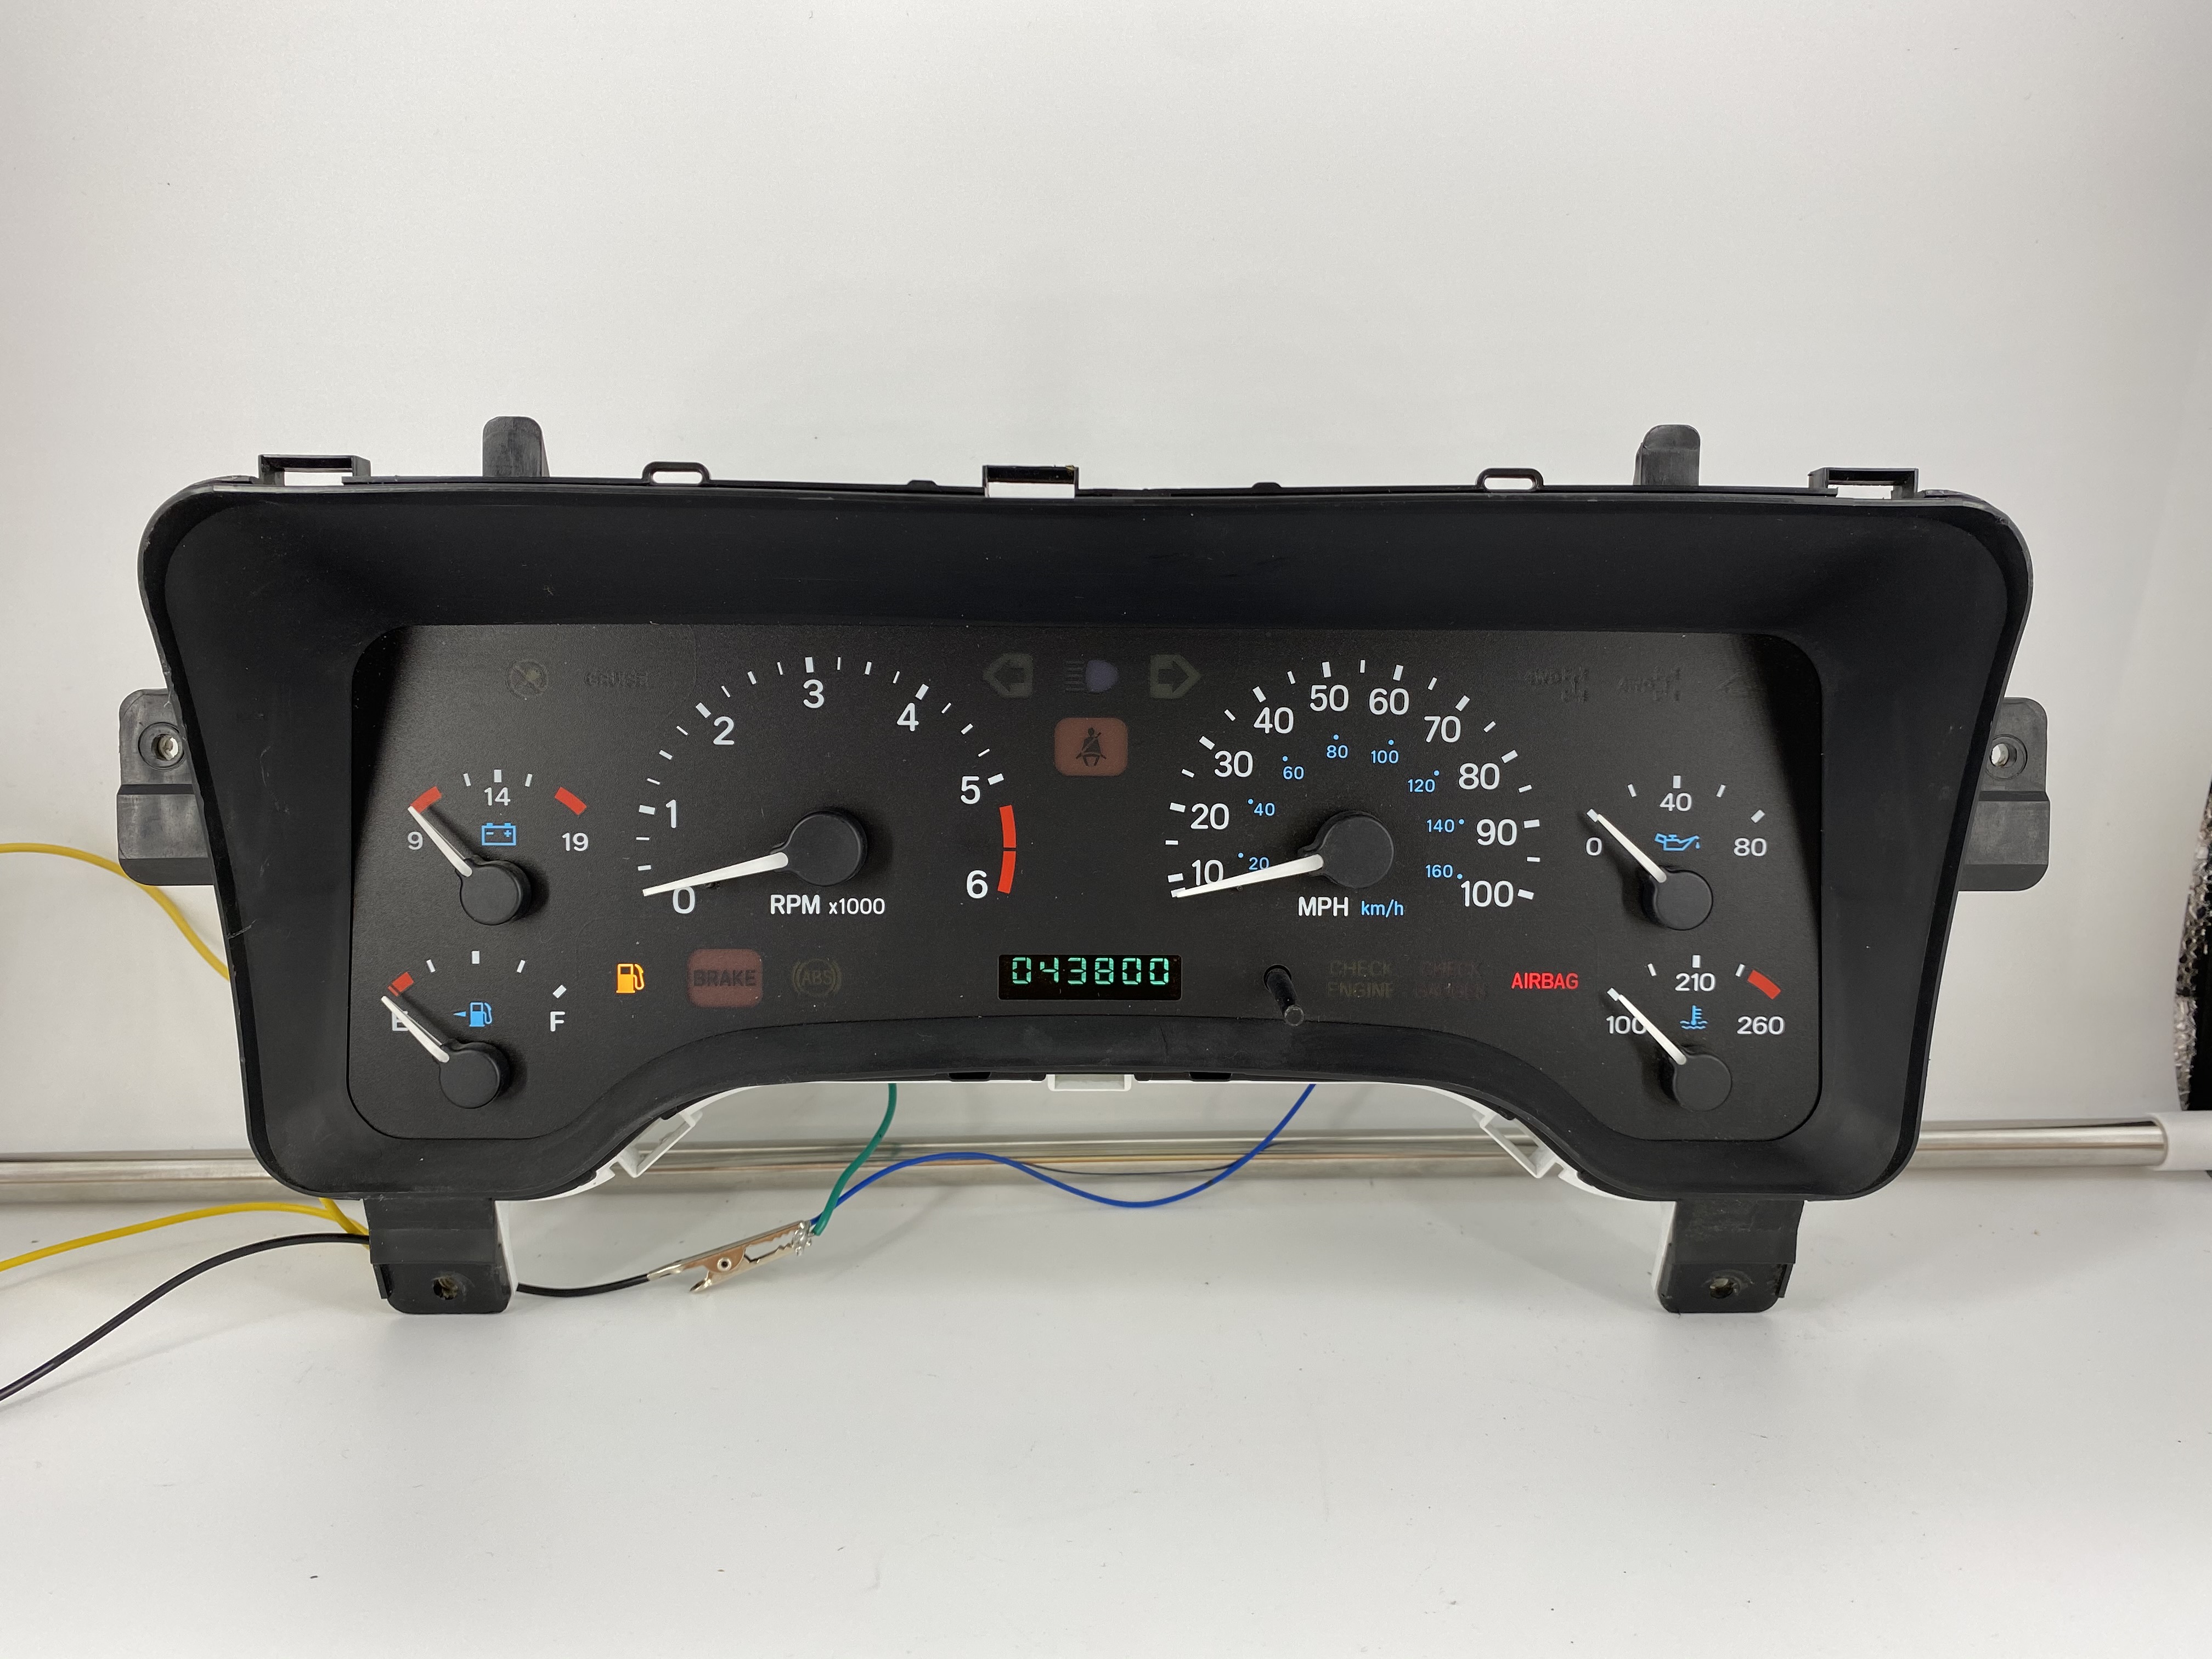 1999 JEEP WRANGLER USED DASHBOARD INSTRUMENT CLUSTER FOR SALE (MPH) - DASHBOARD  INSTRUMENT CLUSTER